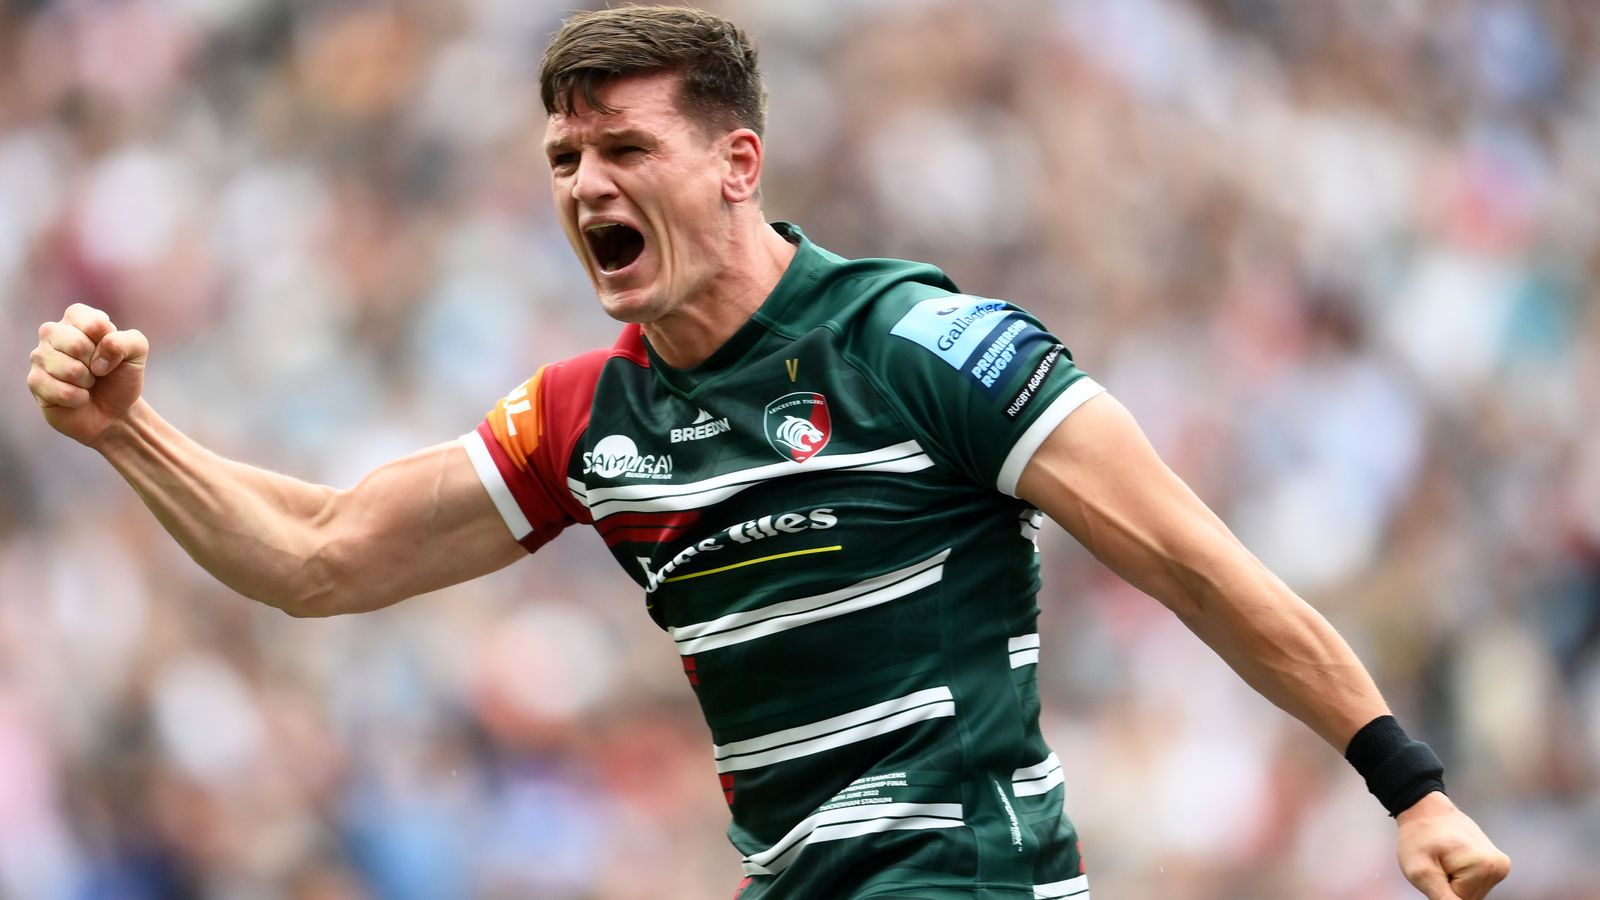 Leicester Tigers 15-12 Saracens: Last-minute Freddie Burns drop goal clinches Gallagher Premiership title